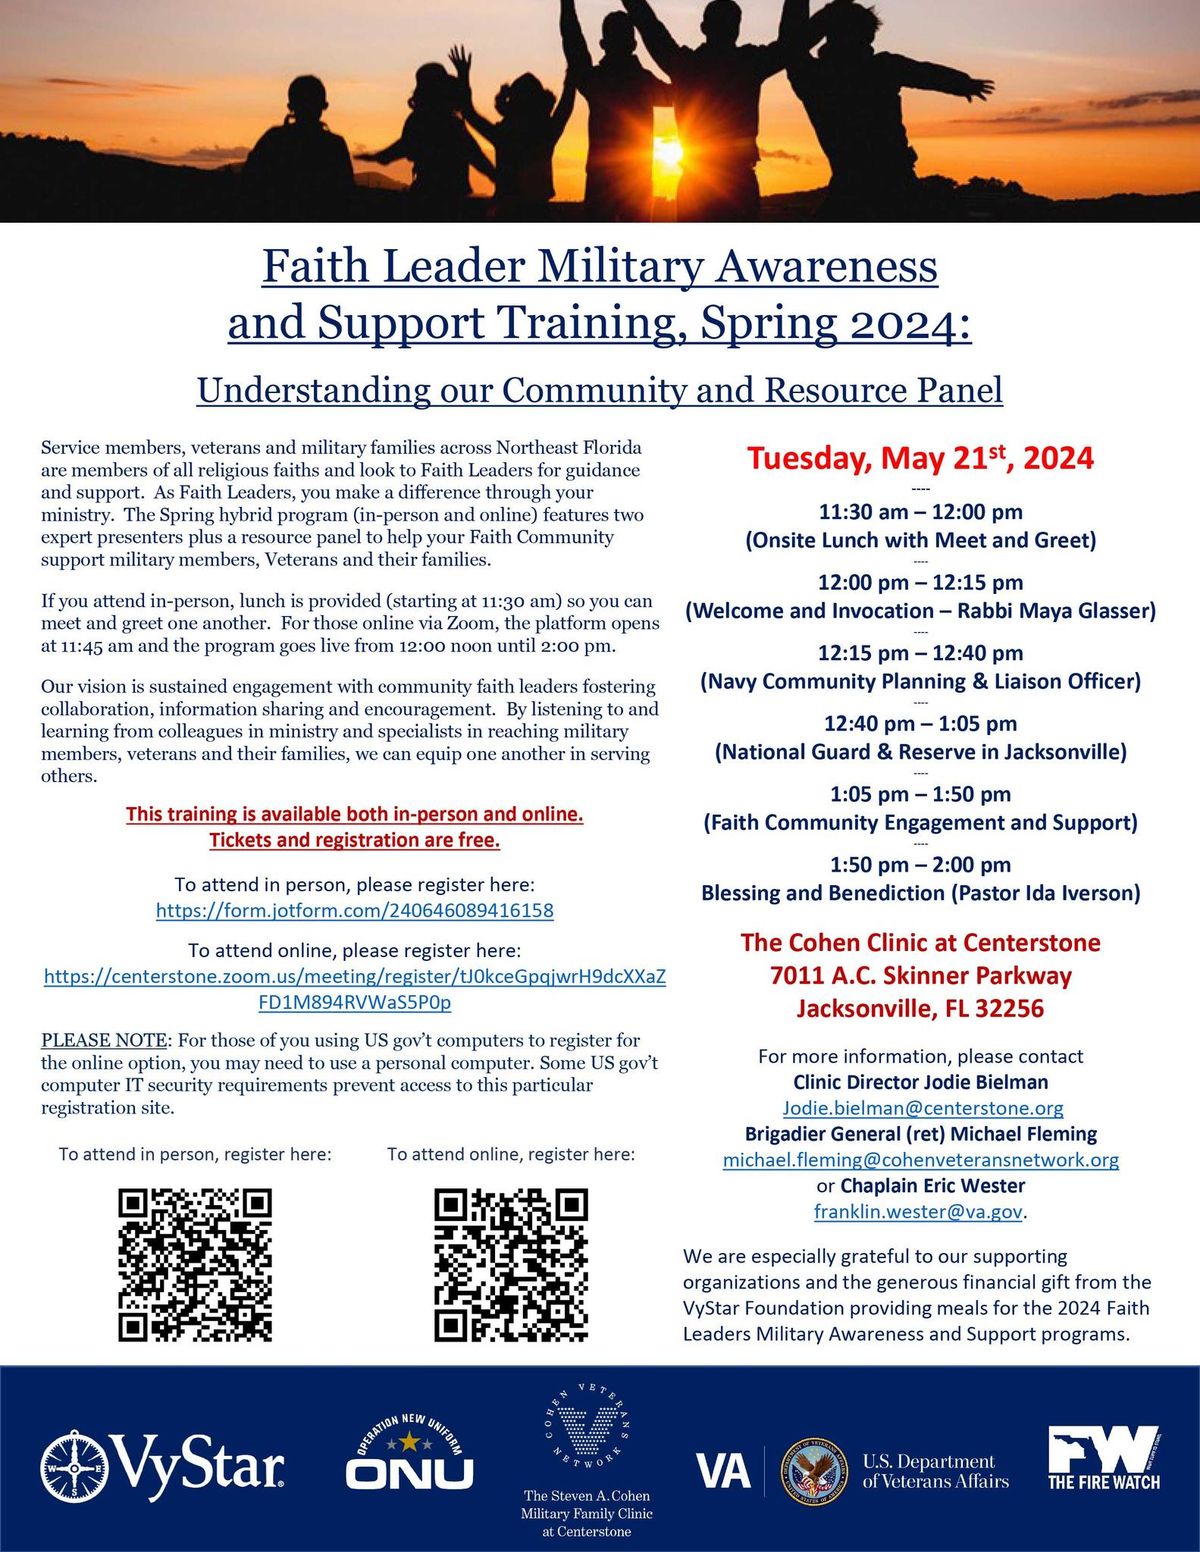 Faith Leader Military Awareness and Support Training, Spring 2024